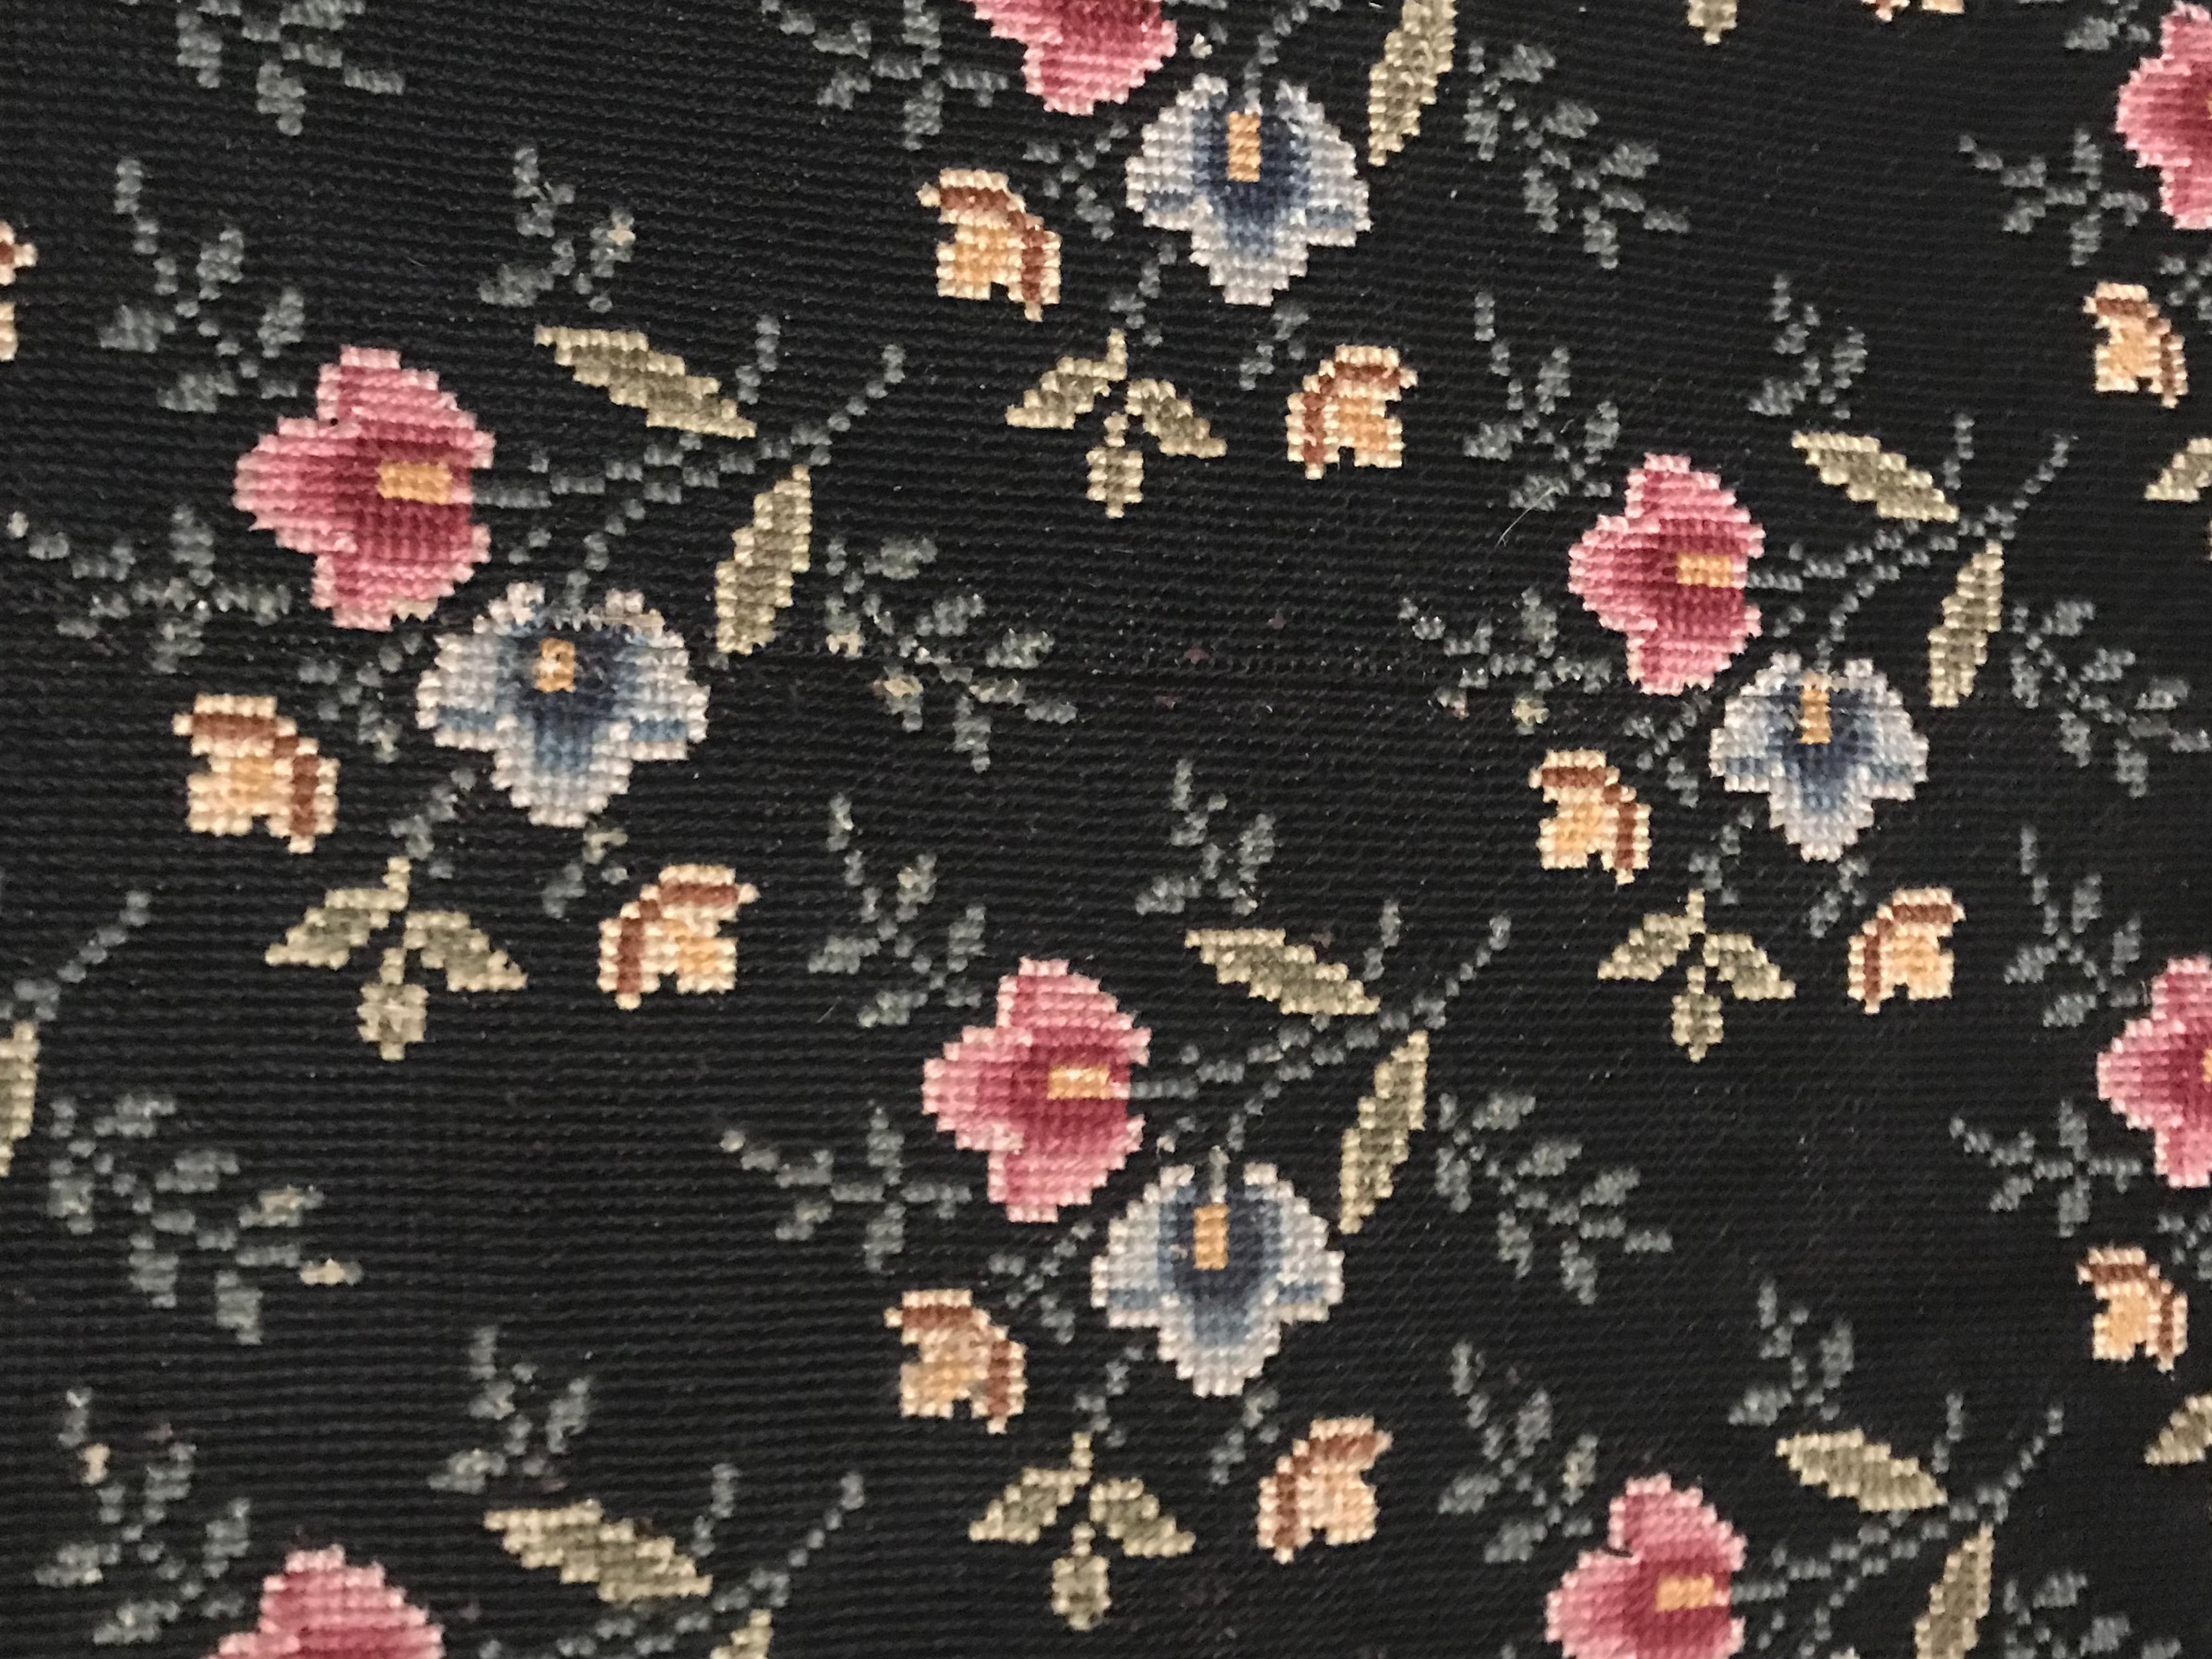 19th century black French carpet. Hand cross stitched wool needle work on linen ground. Coming from a grand estate that stated the carpet was purchased from the St.-Germain-des- Pres antique shop of the French Decorator Madeleine Castaing in the